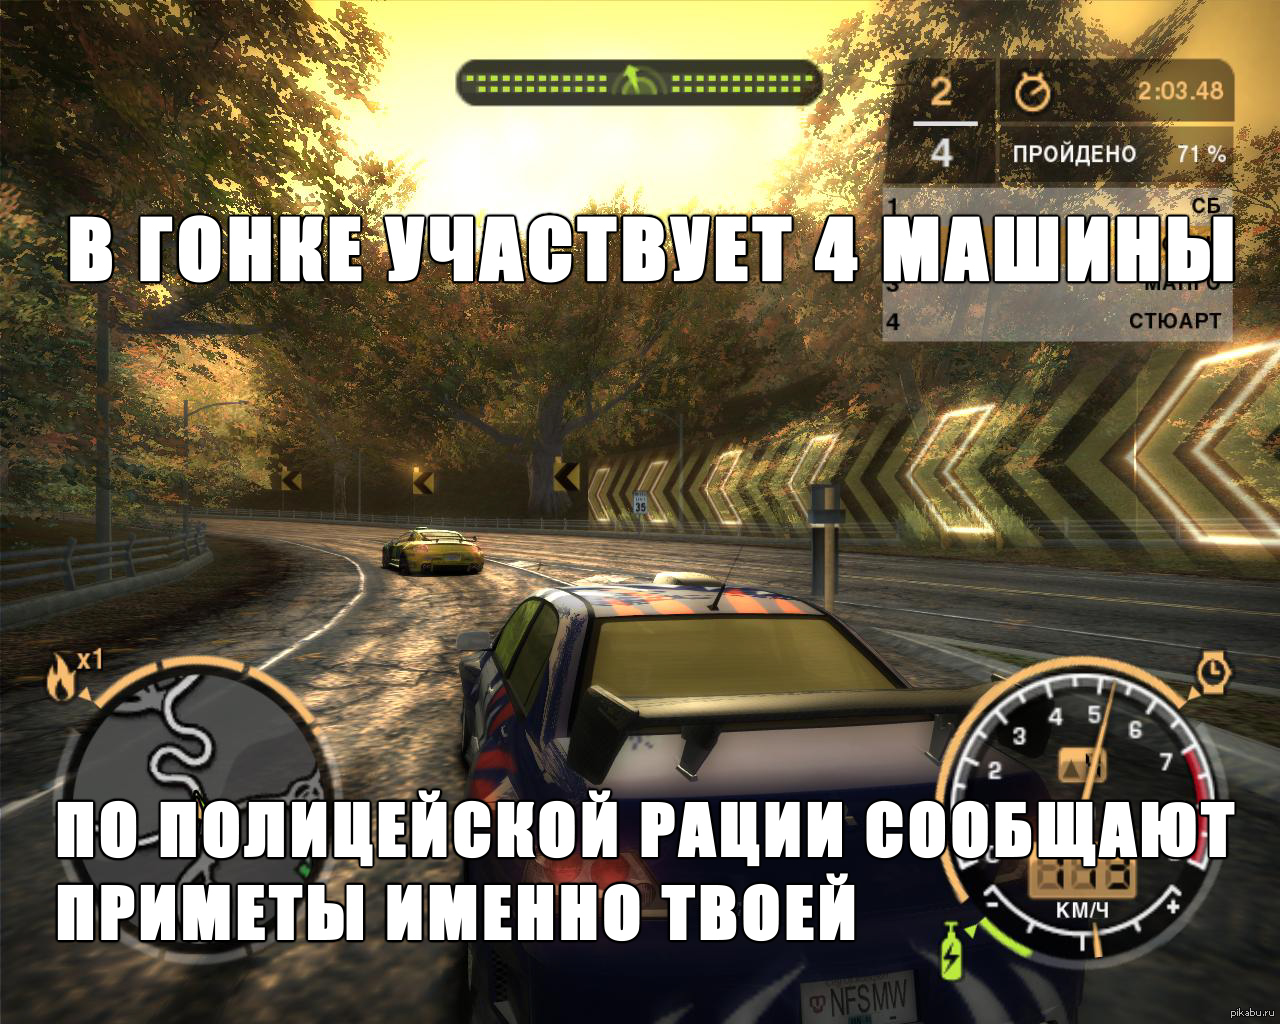 Можно ли гонять. NFS most wanted мемы. Need for Speed most wanted приколы. Приколы про нфс. Мемы про нид фор СПИД.